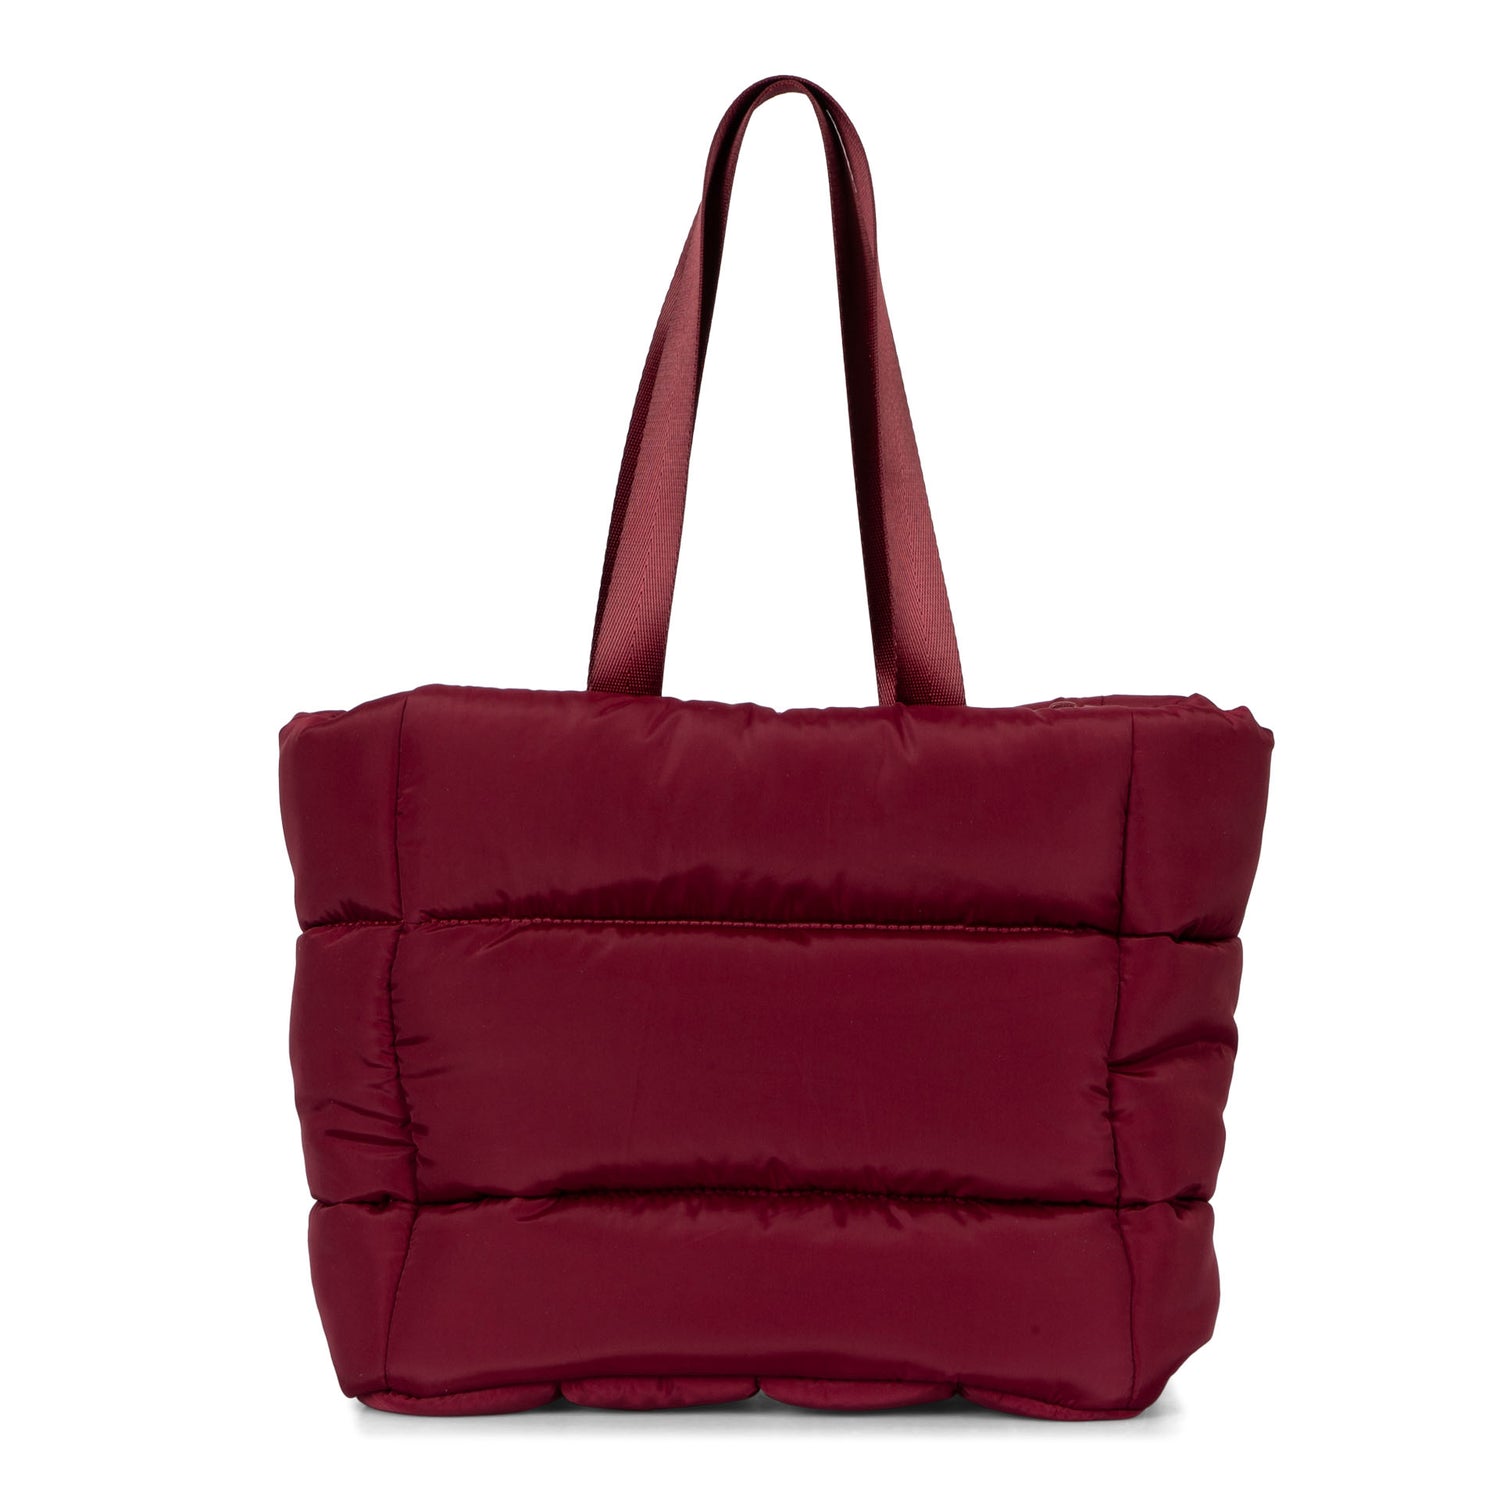 Front side of a red lunch tote bag called Urban Quilted designed by Tracker on a white background, showcasing its long top handles.